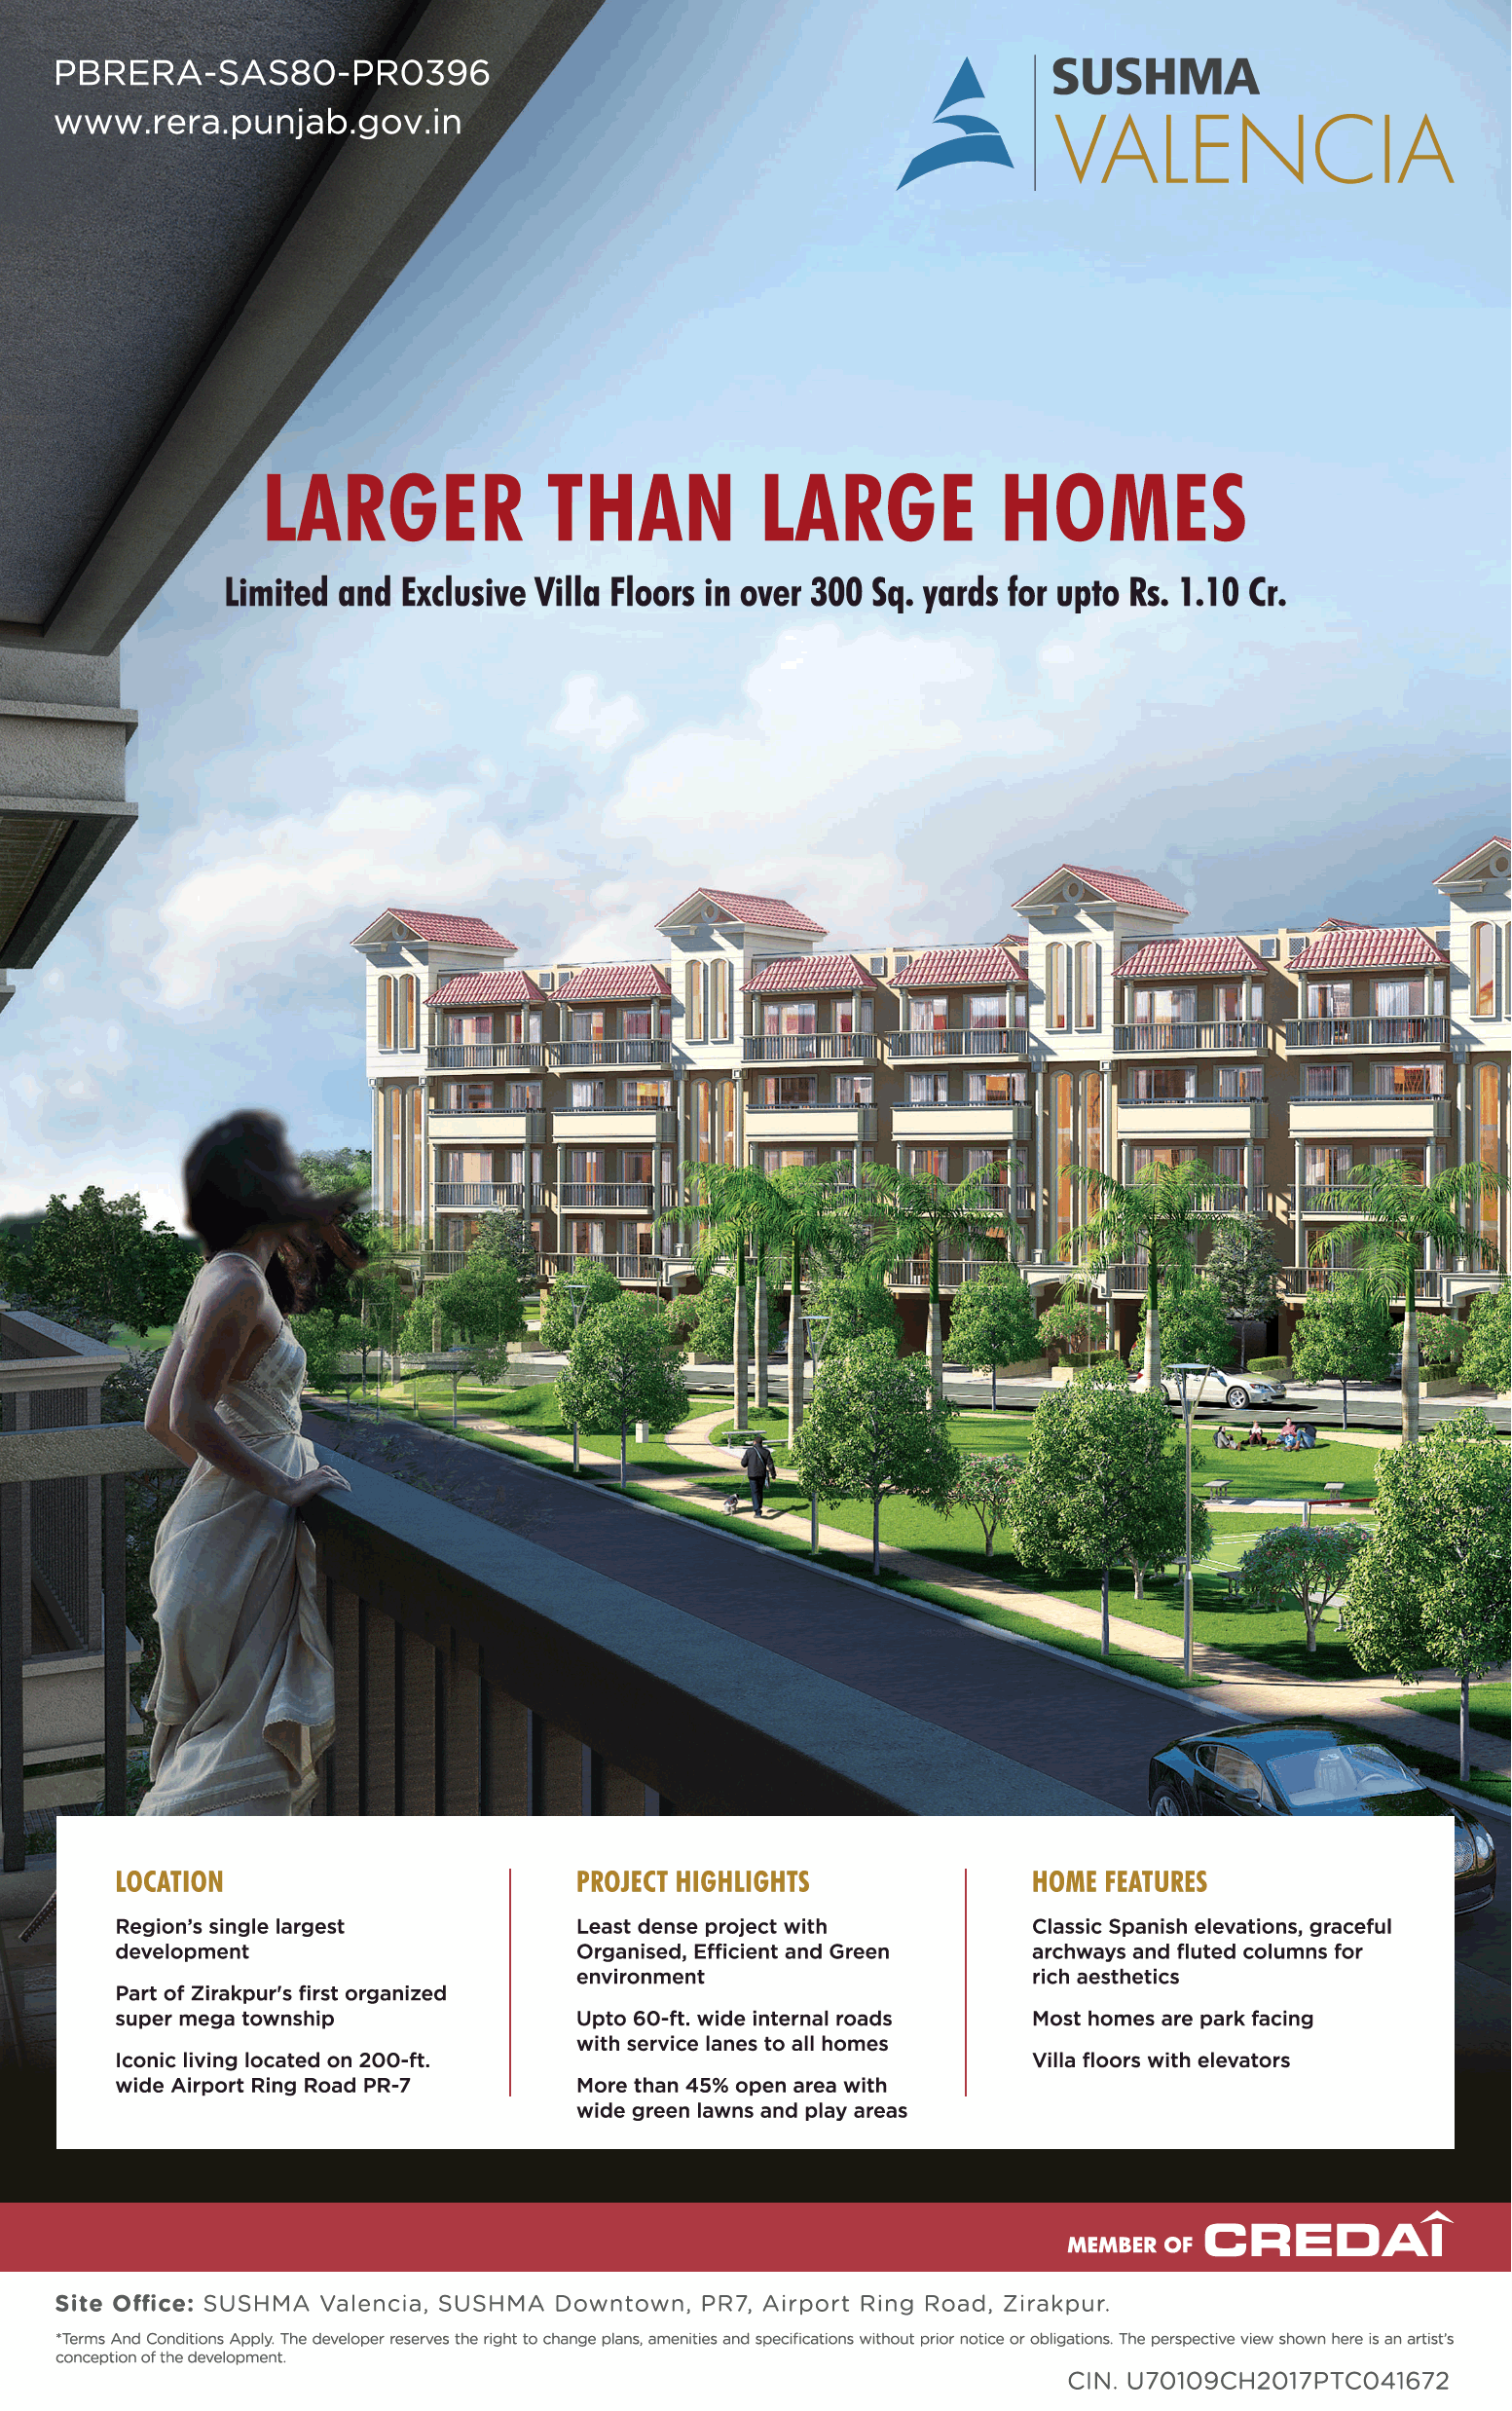 Limited and exclusive villa floors upto Rs. 1.10 cr at Sushma Valencia, Chandigarh